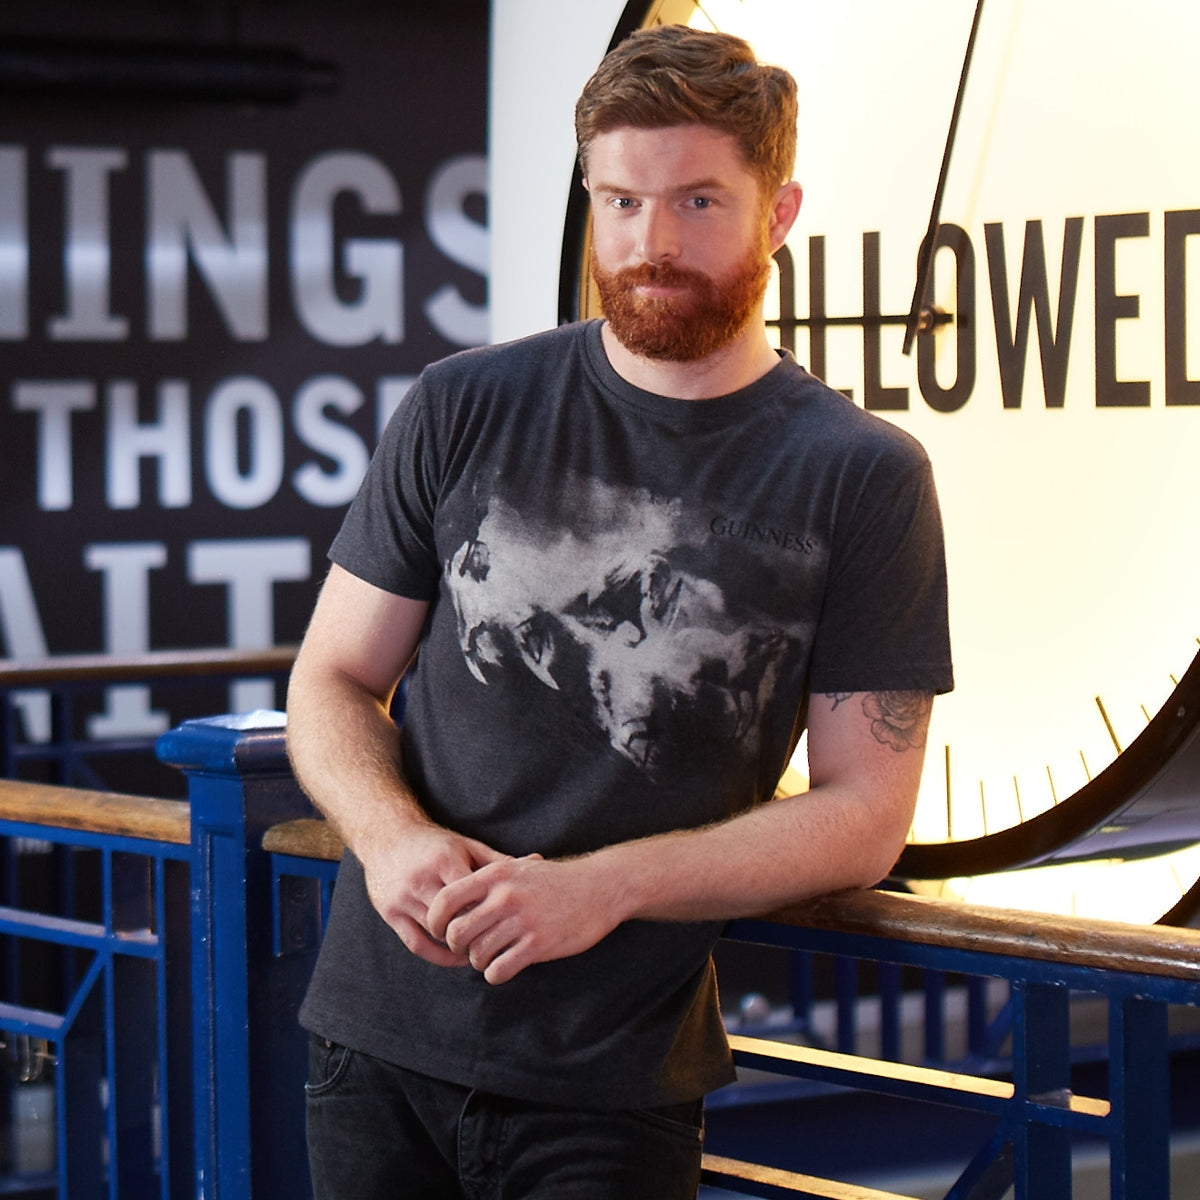 A man leaning against a railing next to a clock, wearing a durable cotton blend fabric Guinness Surf Tee.